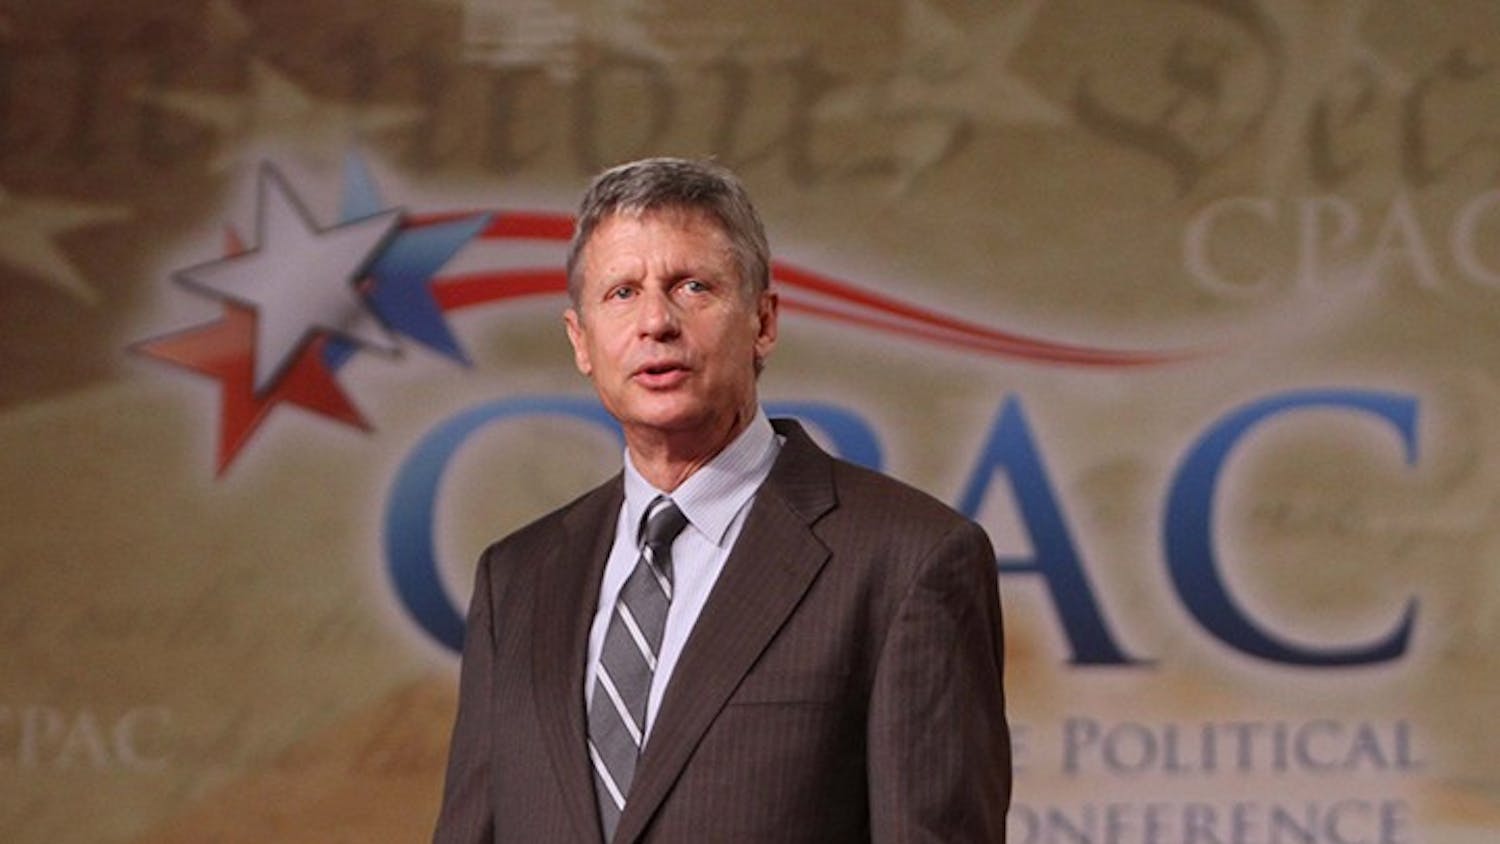 2012 Republican presidential candidate Gary Johnson addresses the Conservative Political Action Conference (CPAC) at the Orange County Convention Center in Orlando, Florida, Friday, September 23, 2011.  (Joe Burbank/Orlando Sentinel/MCT)